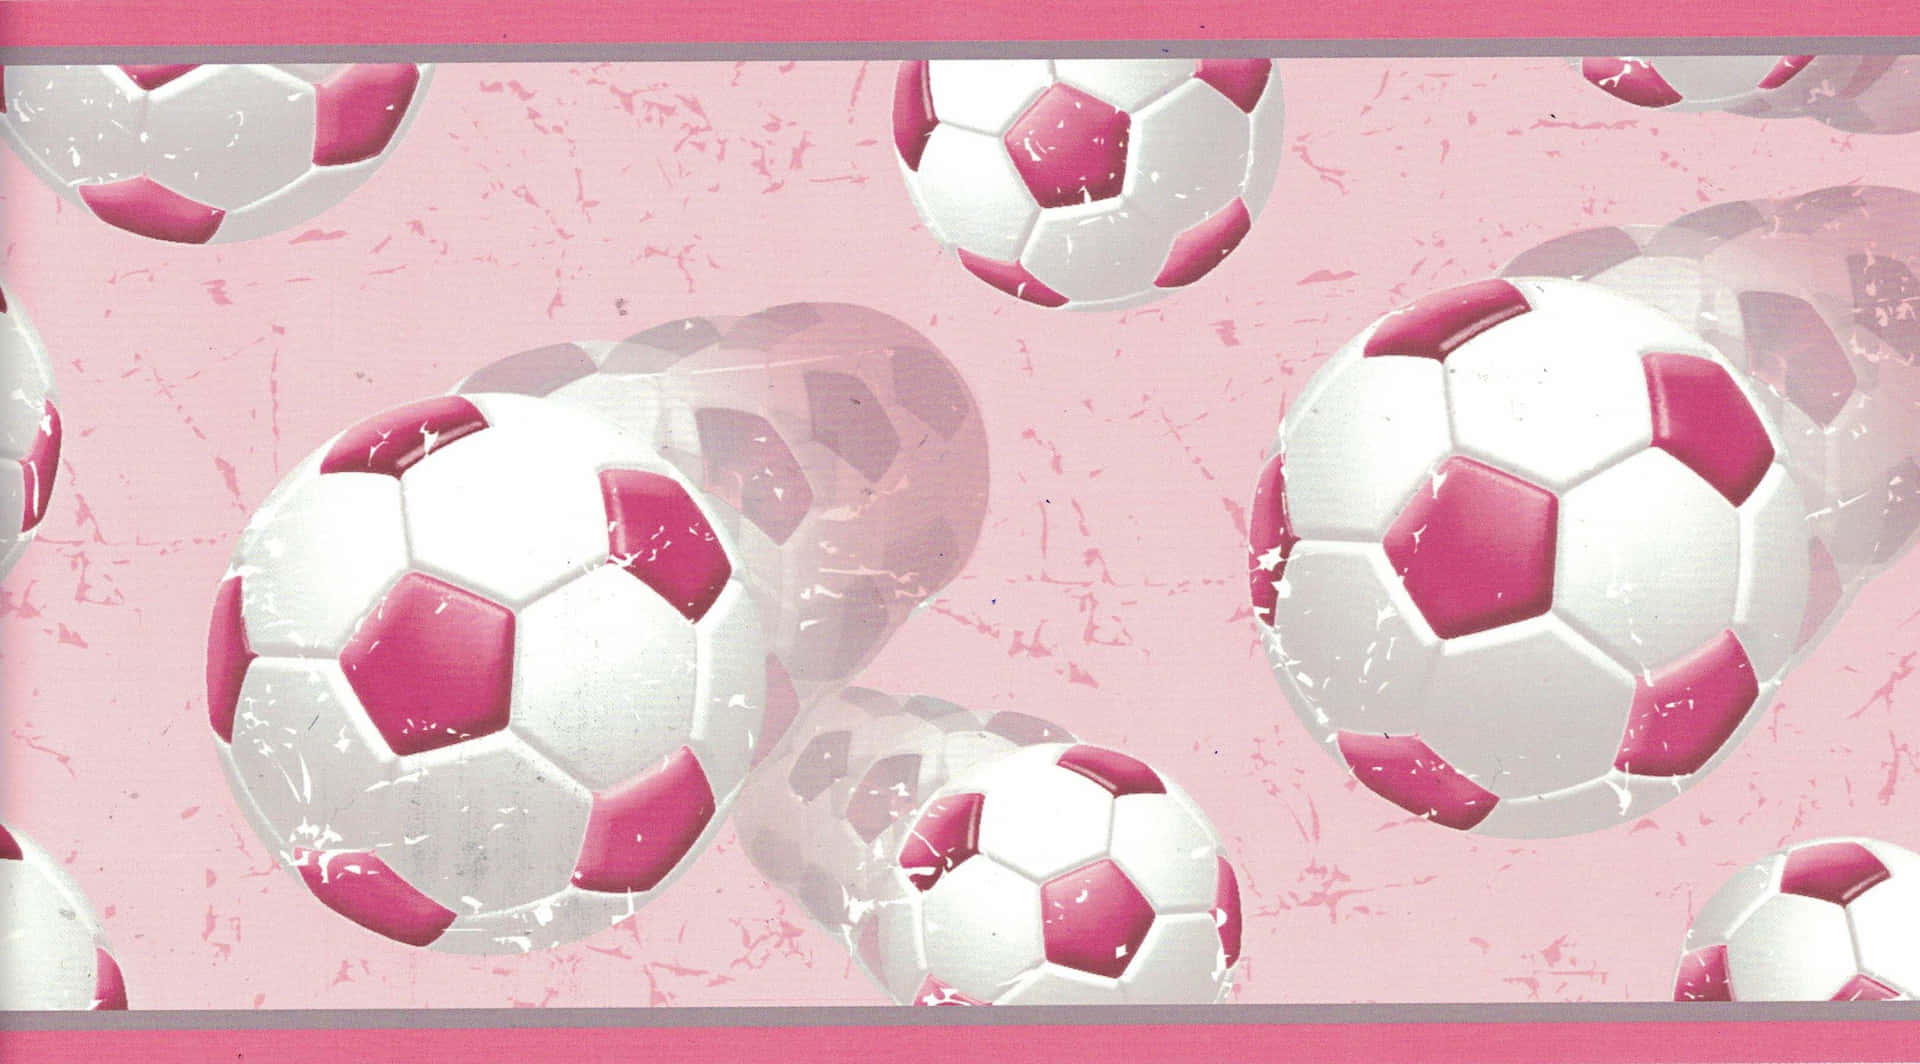 Take the Field with the Vibrant Pink Soccer Ball! Wallpaper